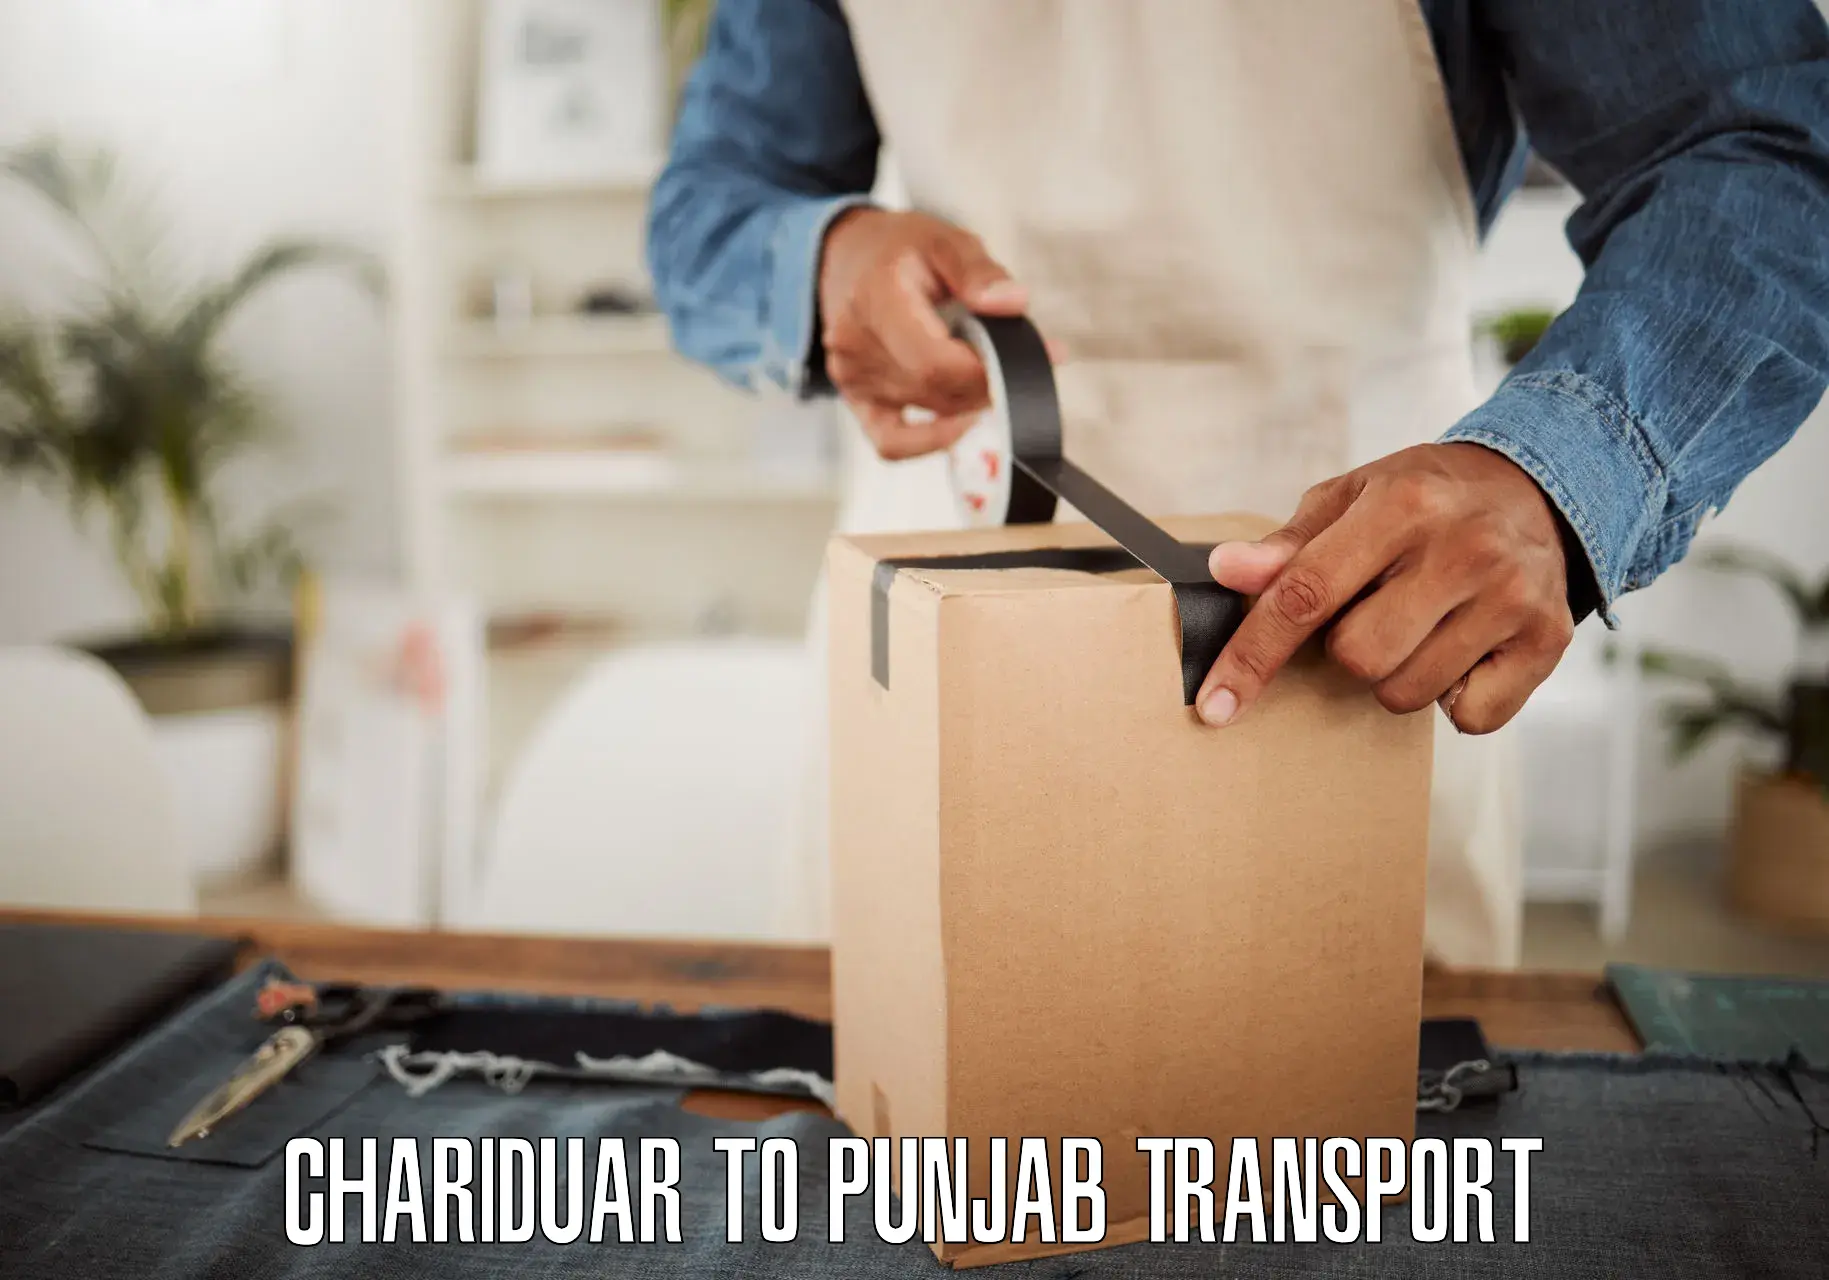 Commercial transport service Chariduar to Patiala